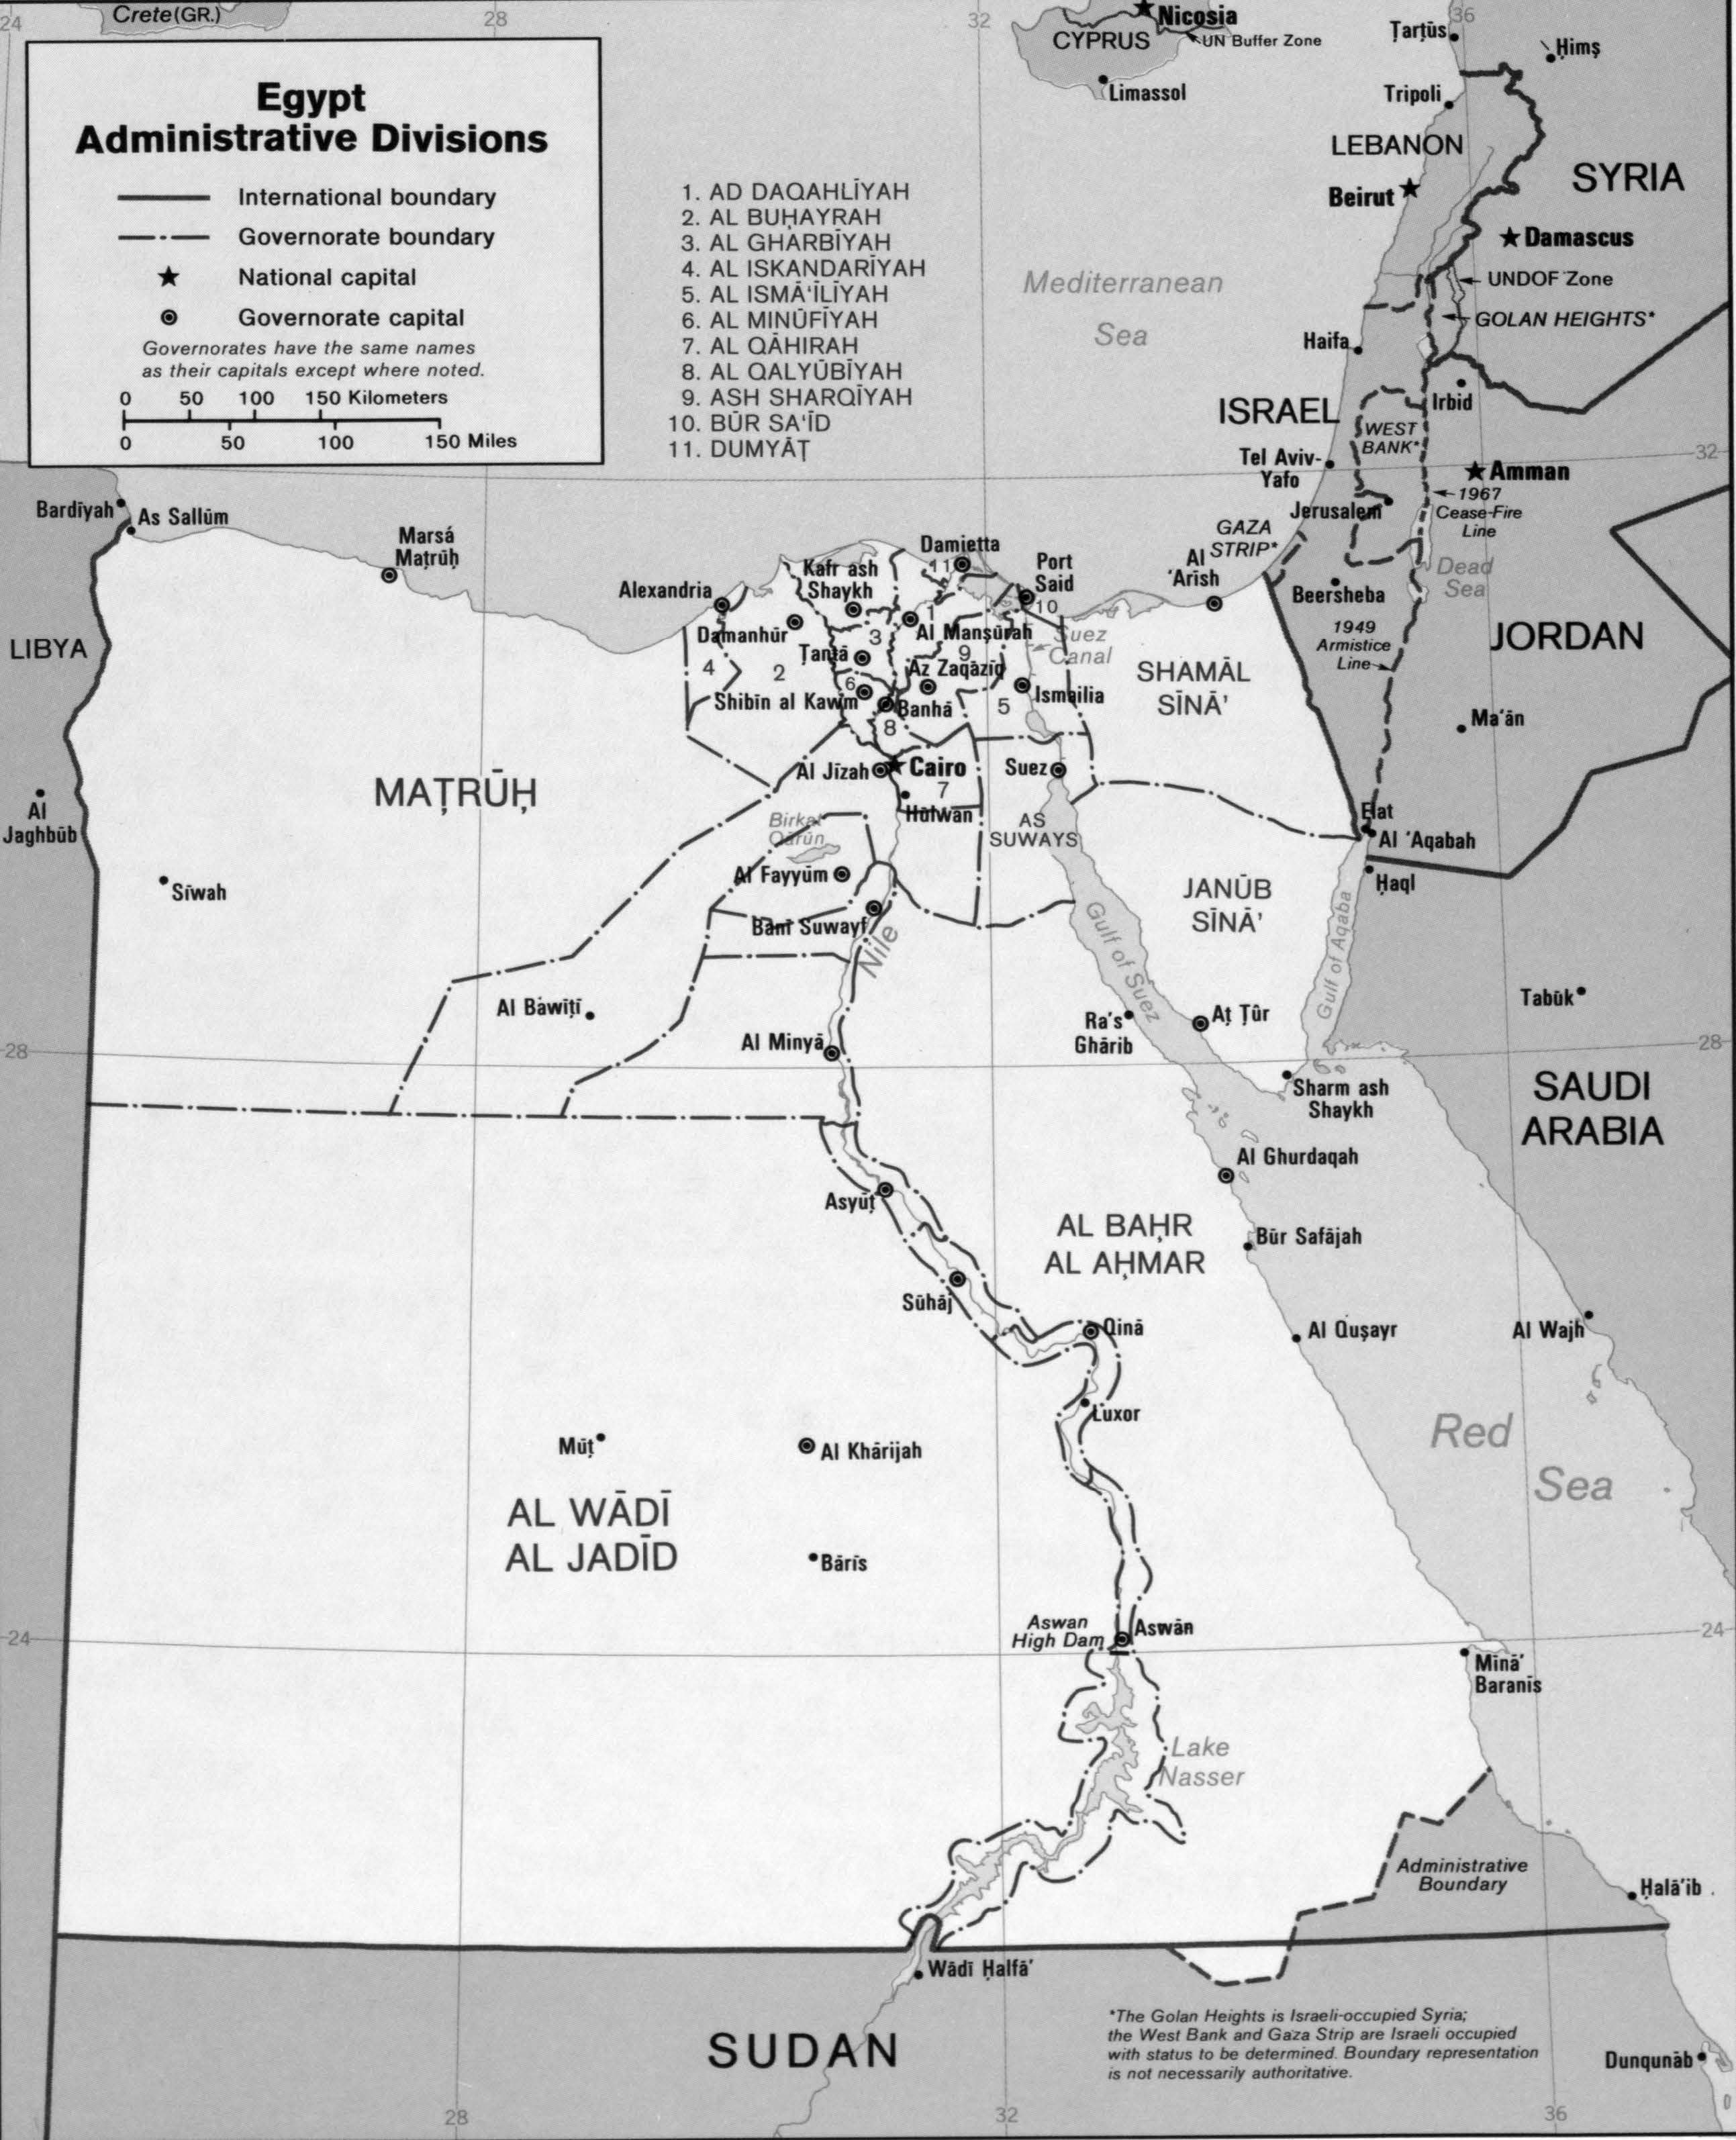 Egypt, Administrative Divisions. Washington, DC: Central Intelligence Agency, 1990. Retrieved from the Library of Congress